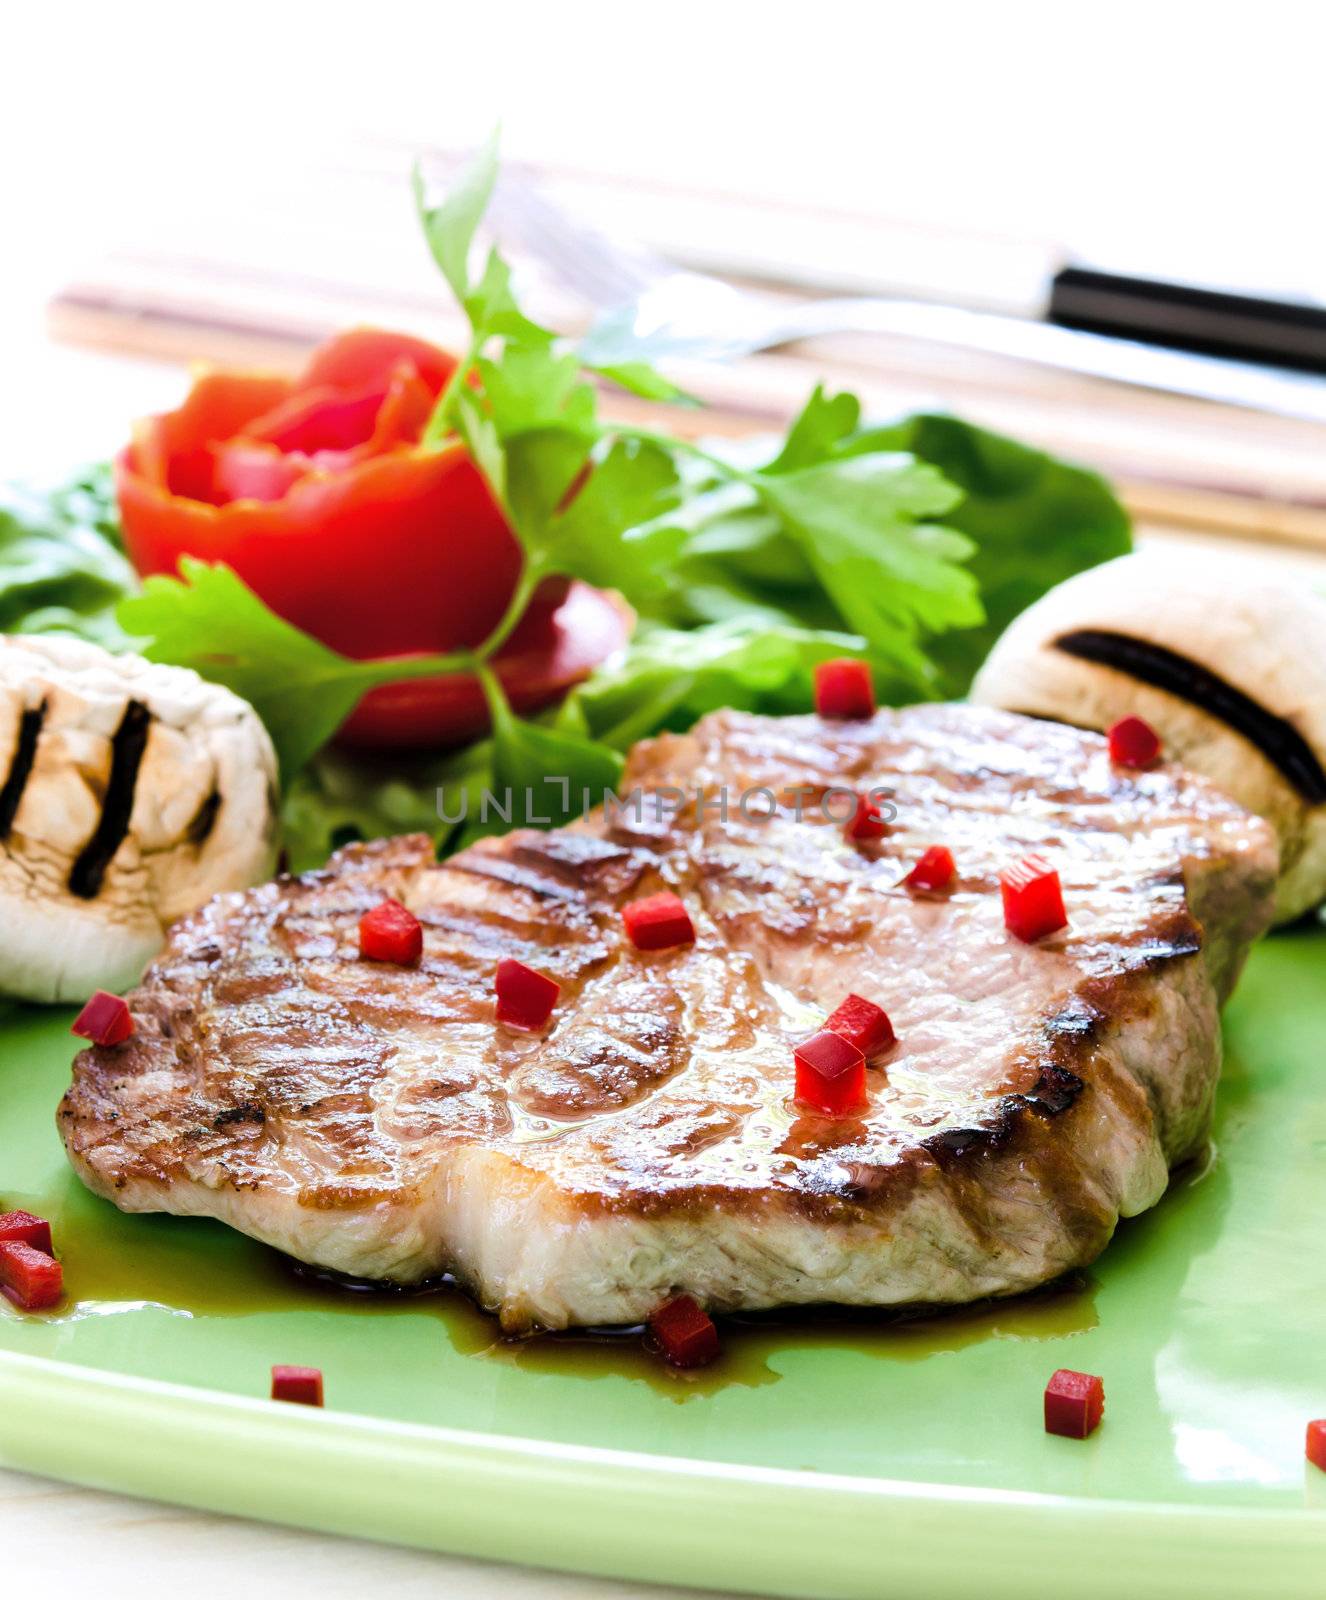 Pork steak with mushrooms and tomato rose on white background